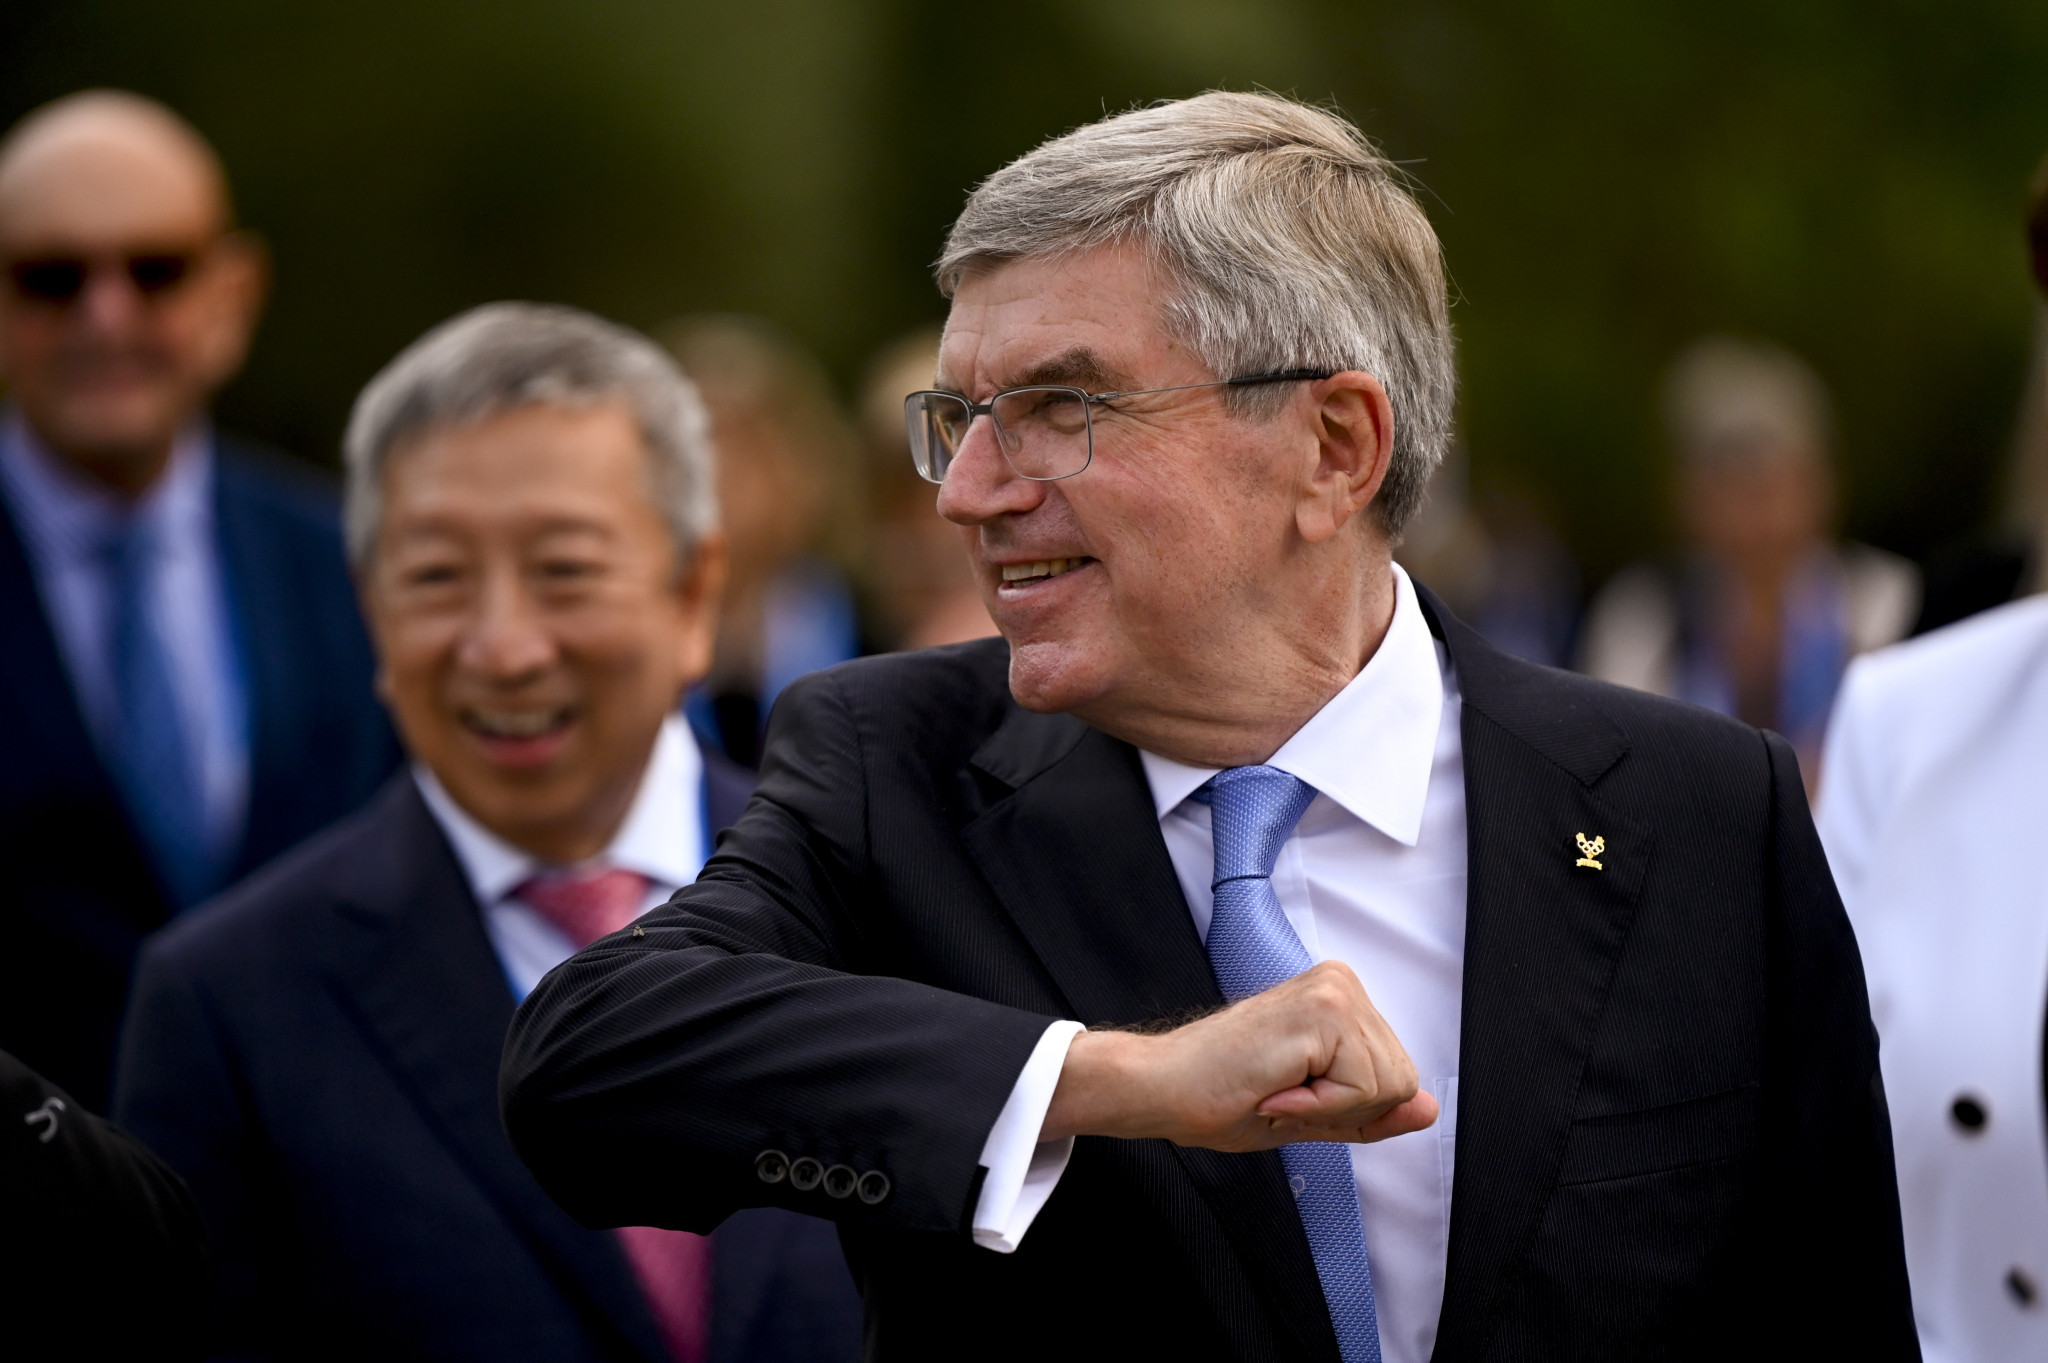 IOC President Thomas Bach demanded the IWF improve its governance and address doping concerns to keep its place on the Olympic programme ©Getty Images